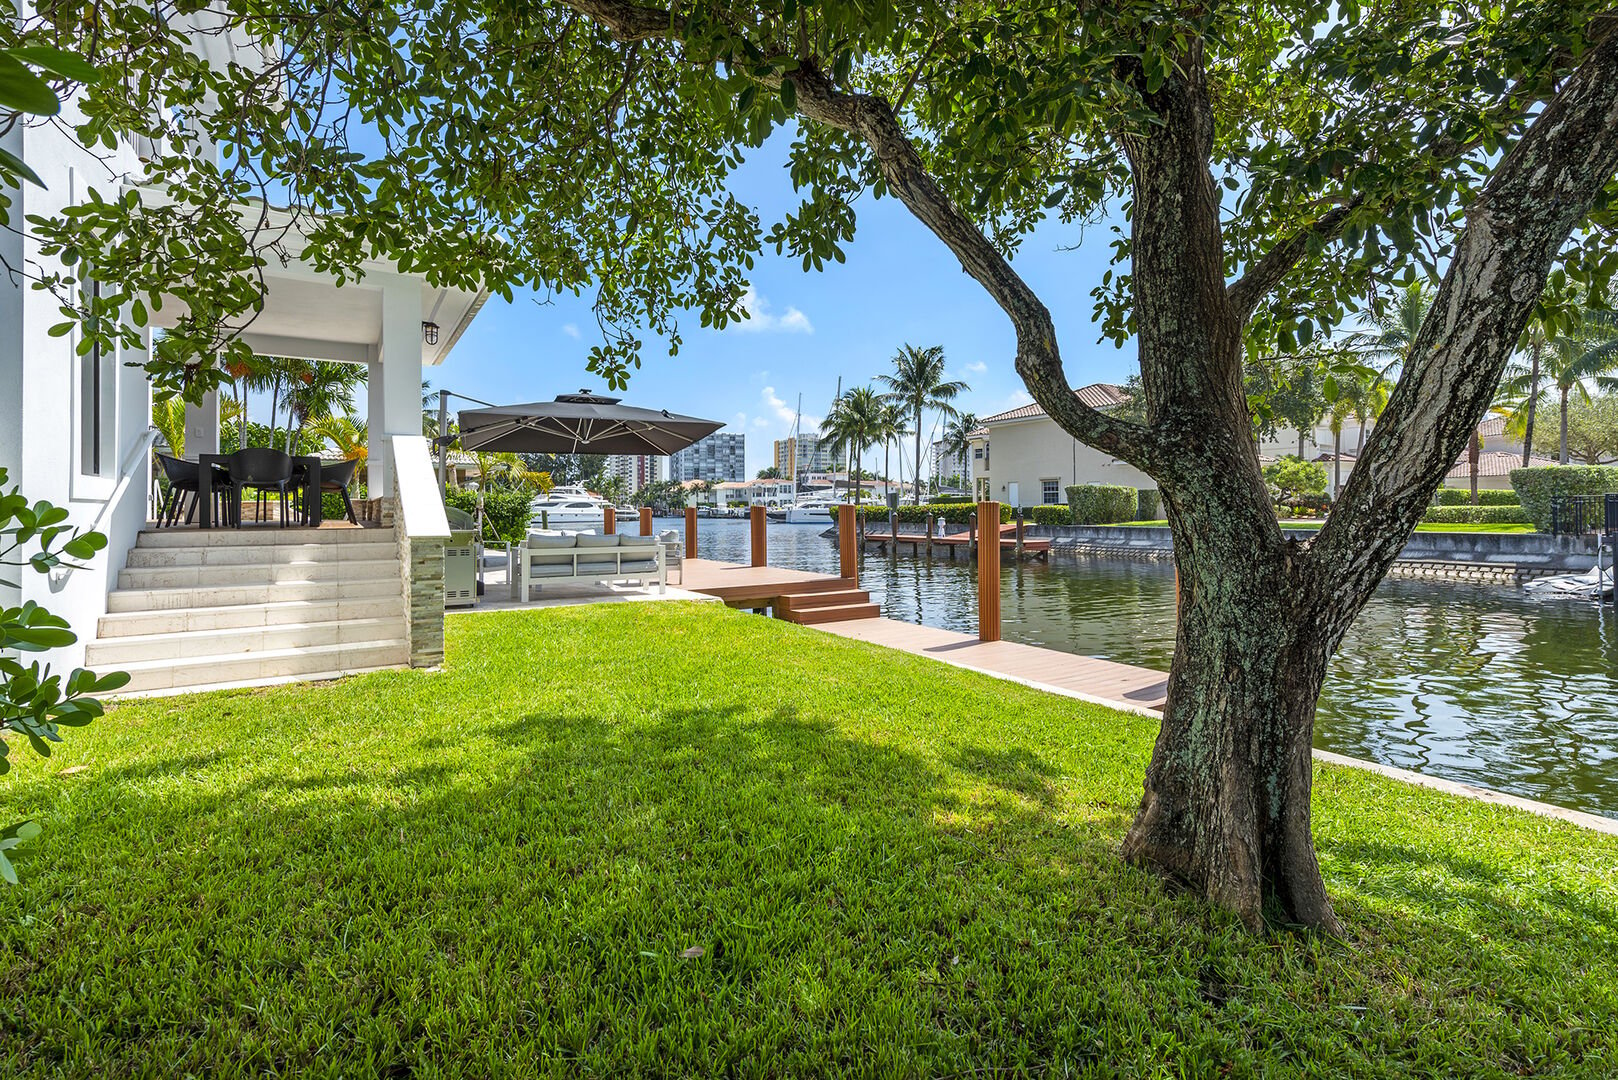 The lush backyard with the covered patio's dinning table, lounge area, heated pool and waterfront views.